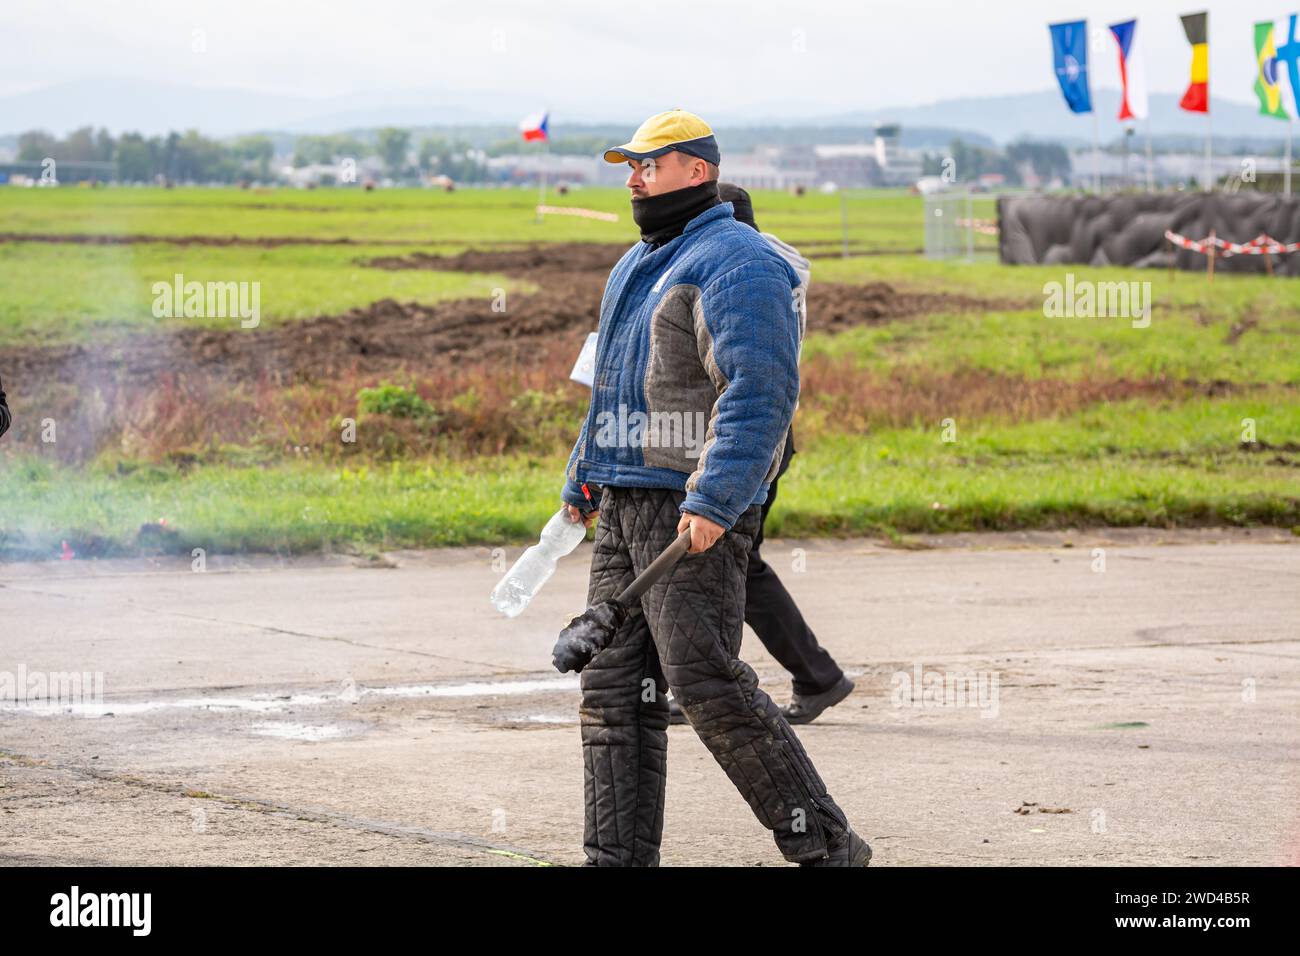 Rioters and protestors at civil unrest demonstration during NATO days airshow. Angry people with flags, bottles, objects and fire. Stock Photo